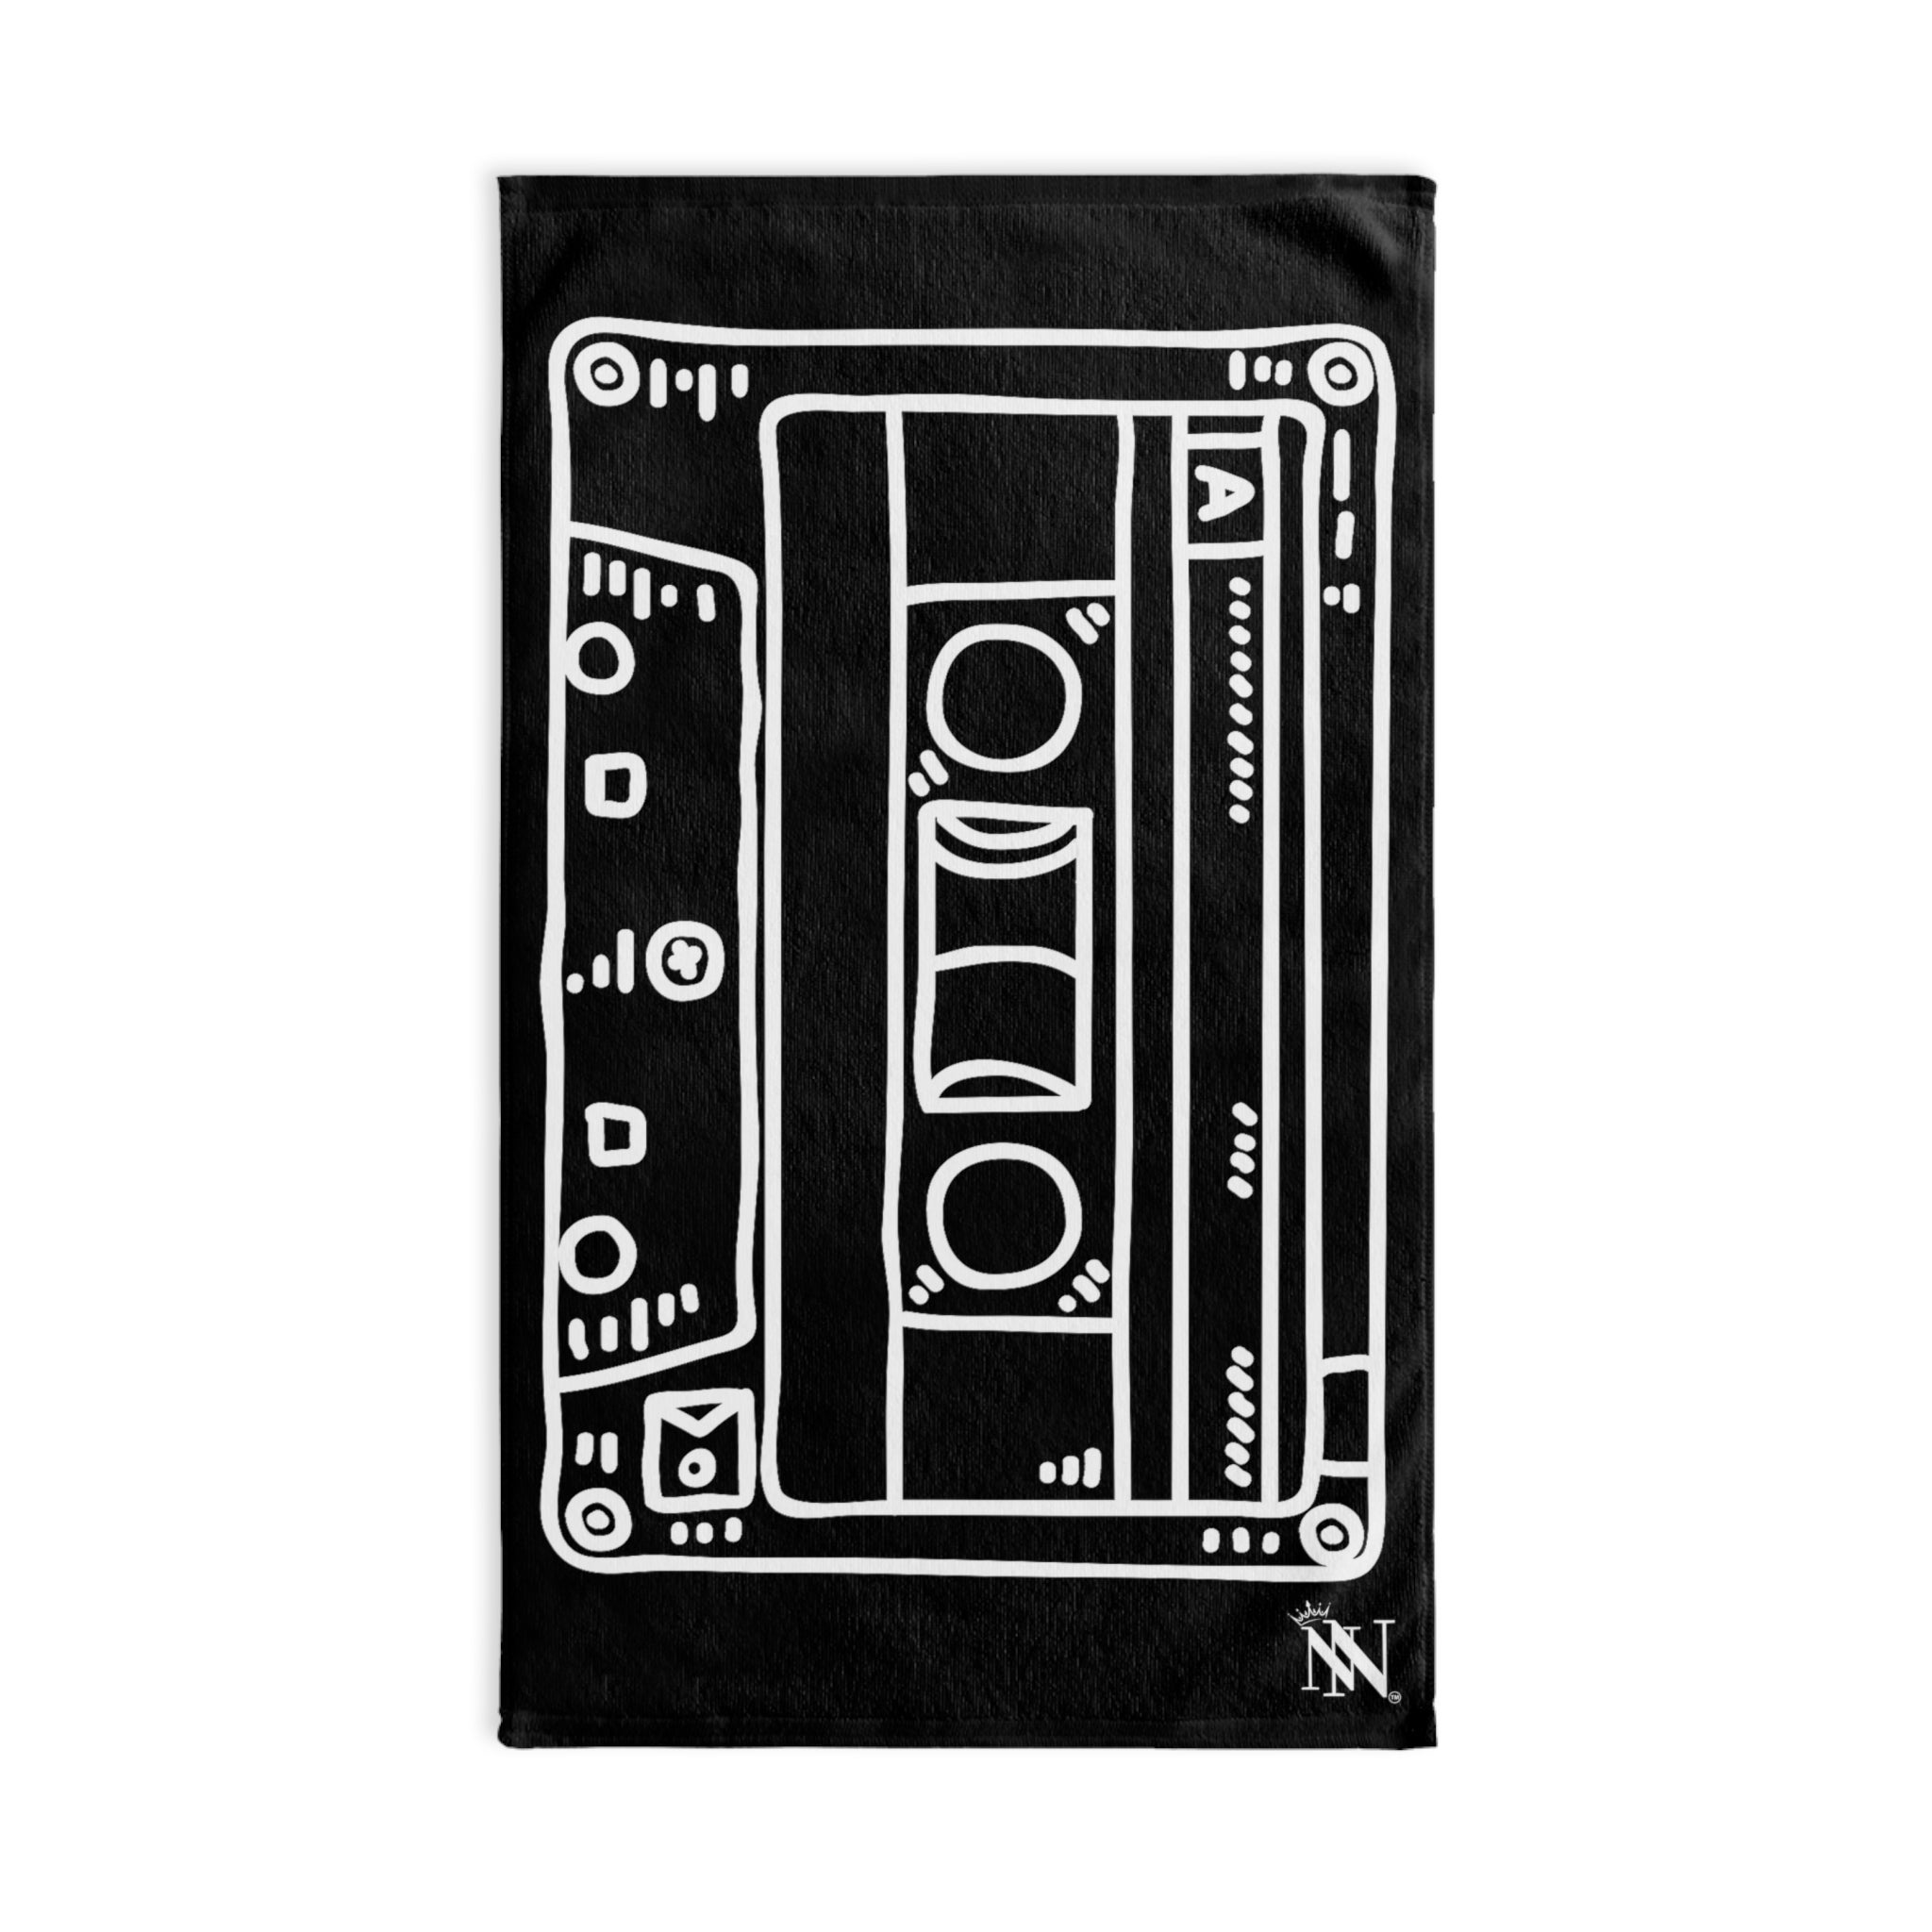 Cassette Tape 80s Black | Sexy Gifts for Boyfriend, Funny Towel Romantic Gift for Wedding Couple Fiance First Year 2nd Anniversary Valentines, Party Gag Gifts, Joke Humor Cloth for Husband Men BF NECTAR NAPKINS